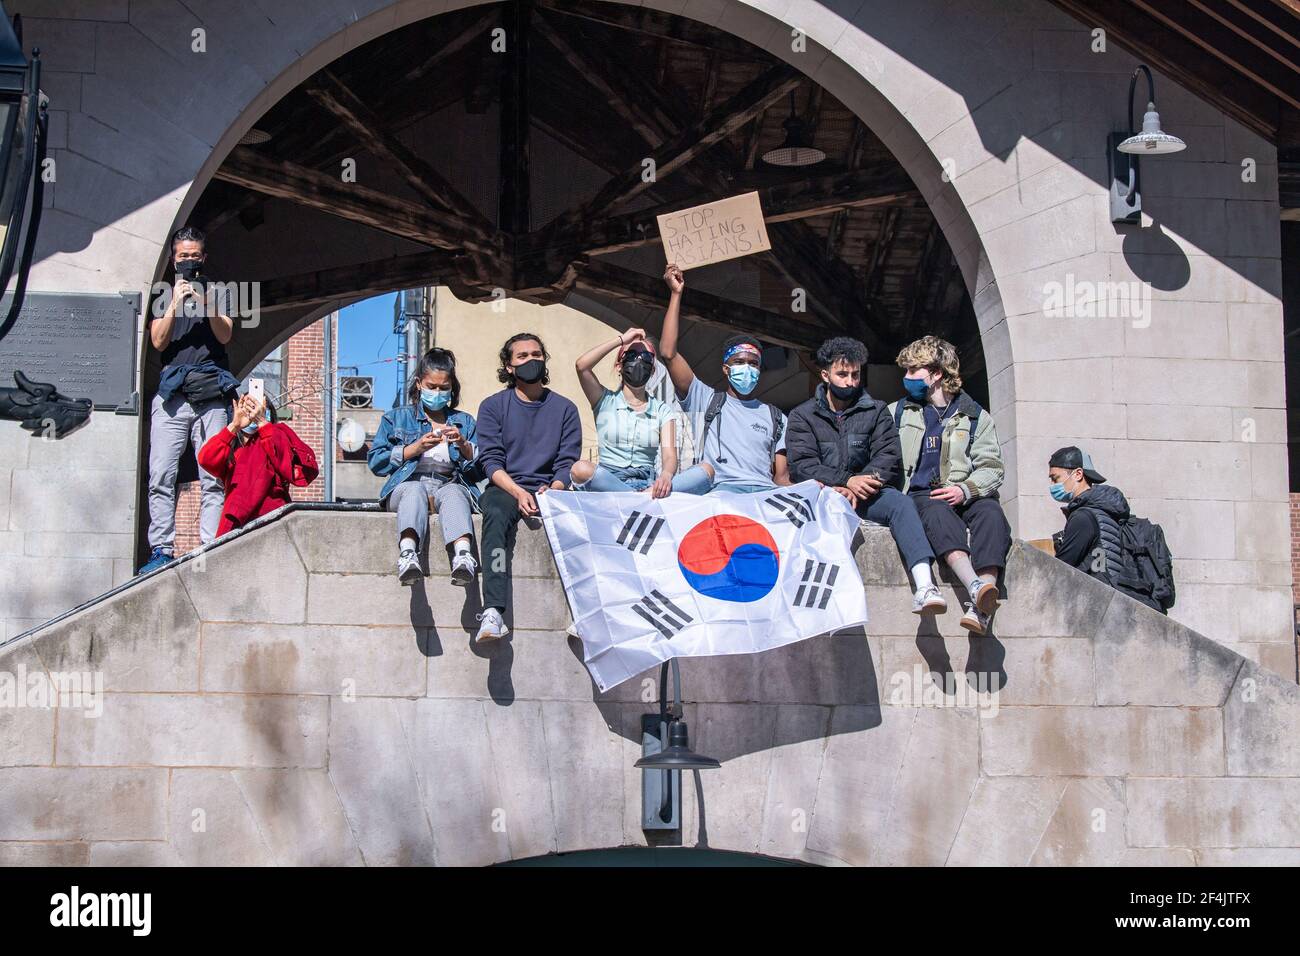 Protesters sit in on a structure over looking the park with a sign that says Stop Hating Asians and Korean flag during a rally against hate in Columbus Park in the Chinatown neighbourhood of Manhattan in New York City.A rally for solidarity was organized in response to a rise in hate crimes against the Asian community since the start of the coronavirus (COVID-19) pandemic in 2020. On March 16 in Atlanta, Georgia, a man went on a shooting spree in three spas that left eight people dead, including six Asian women. Stock Photo